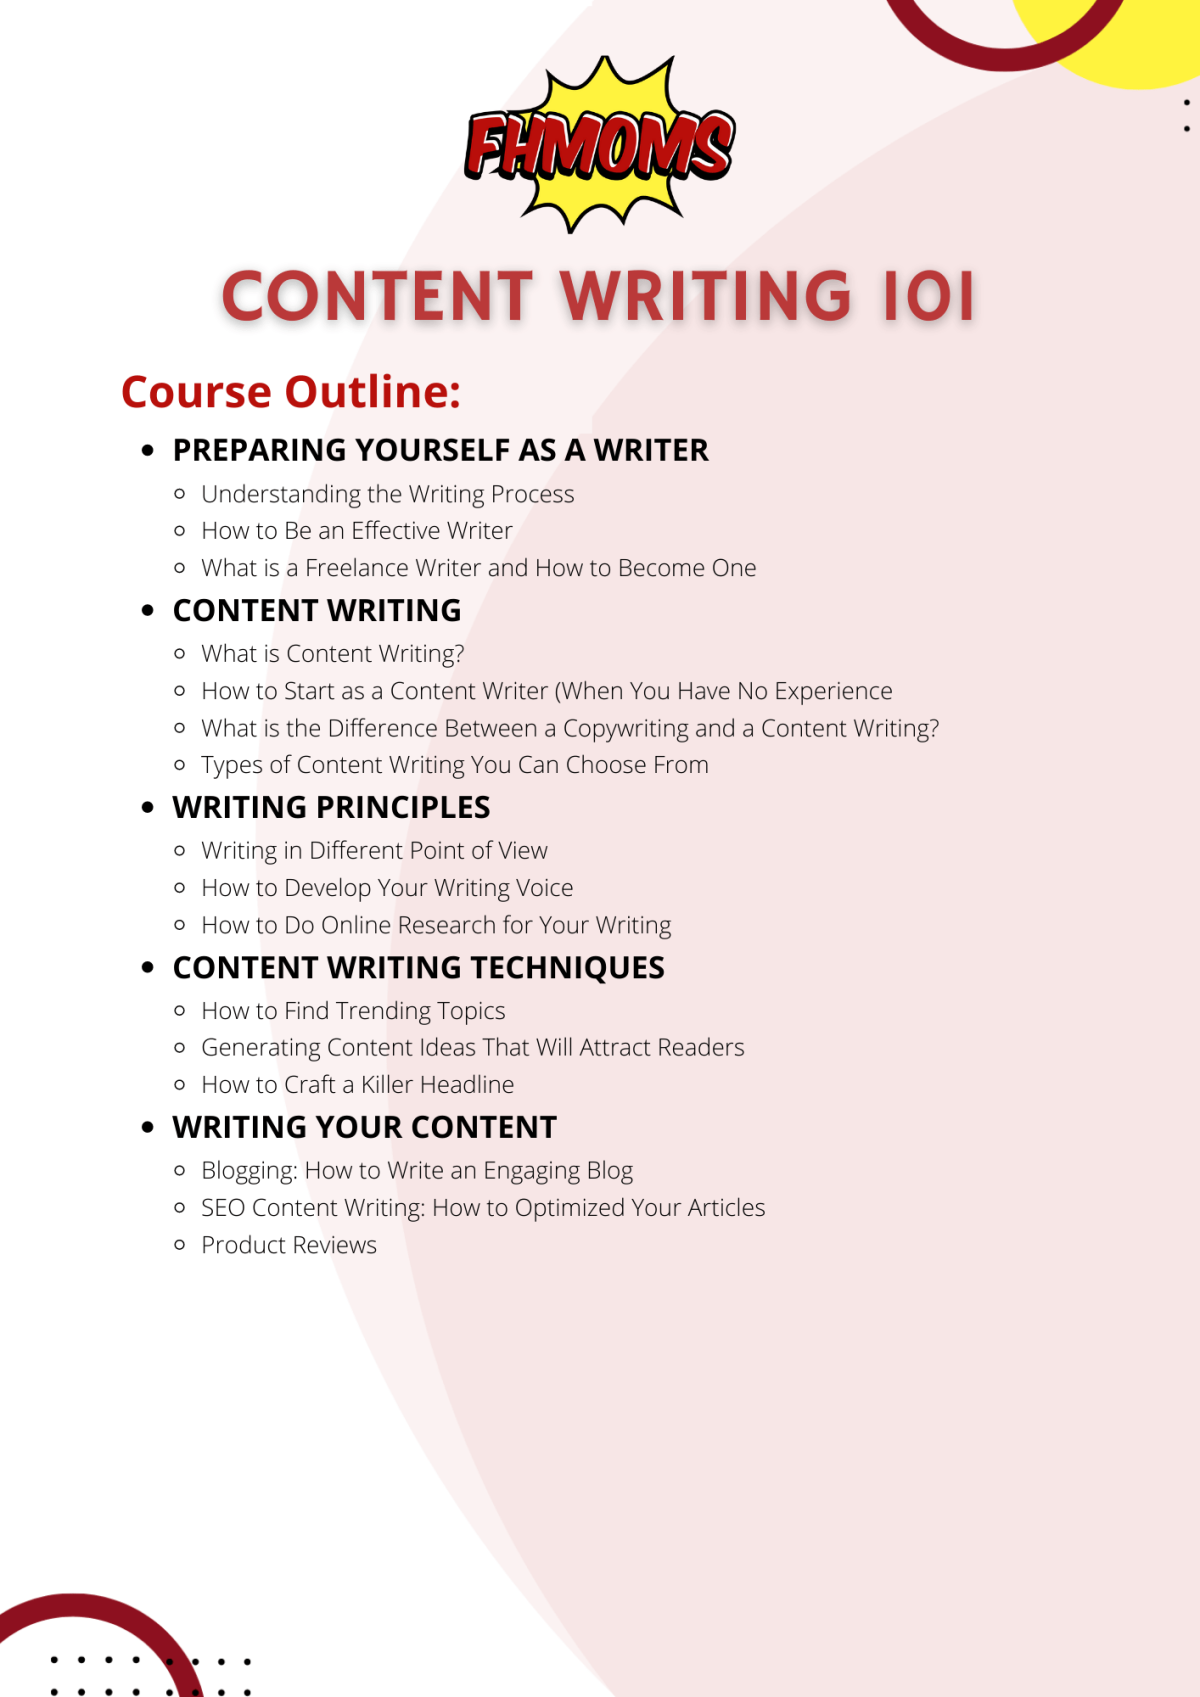 Content Writing 101 Course Outline